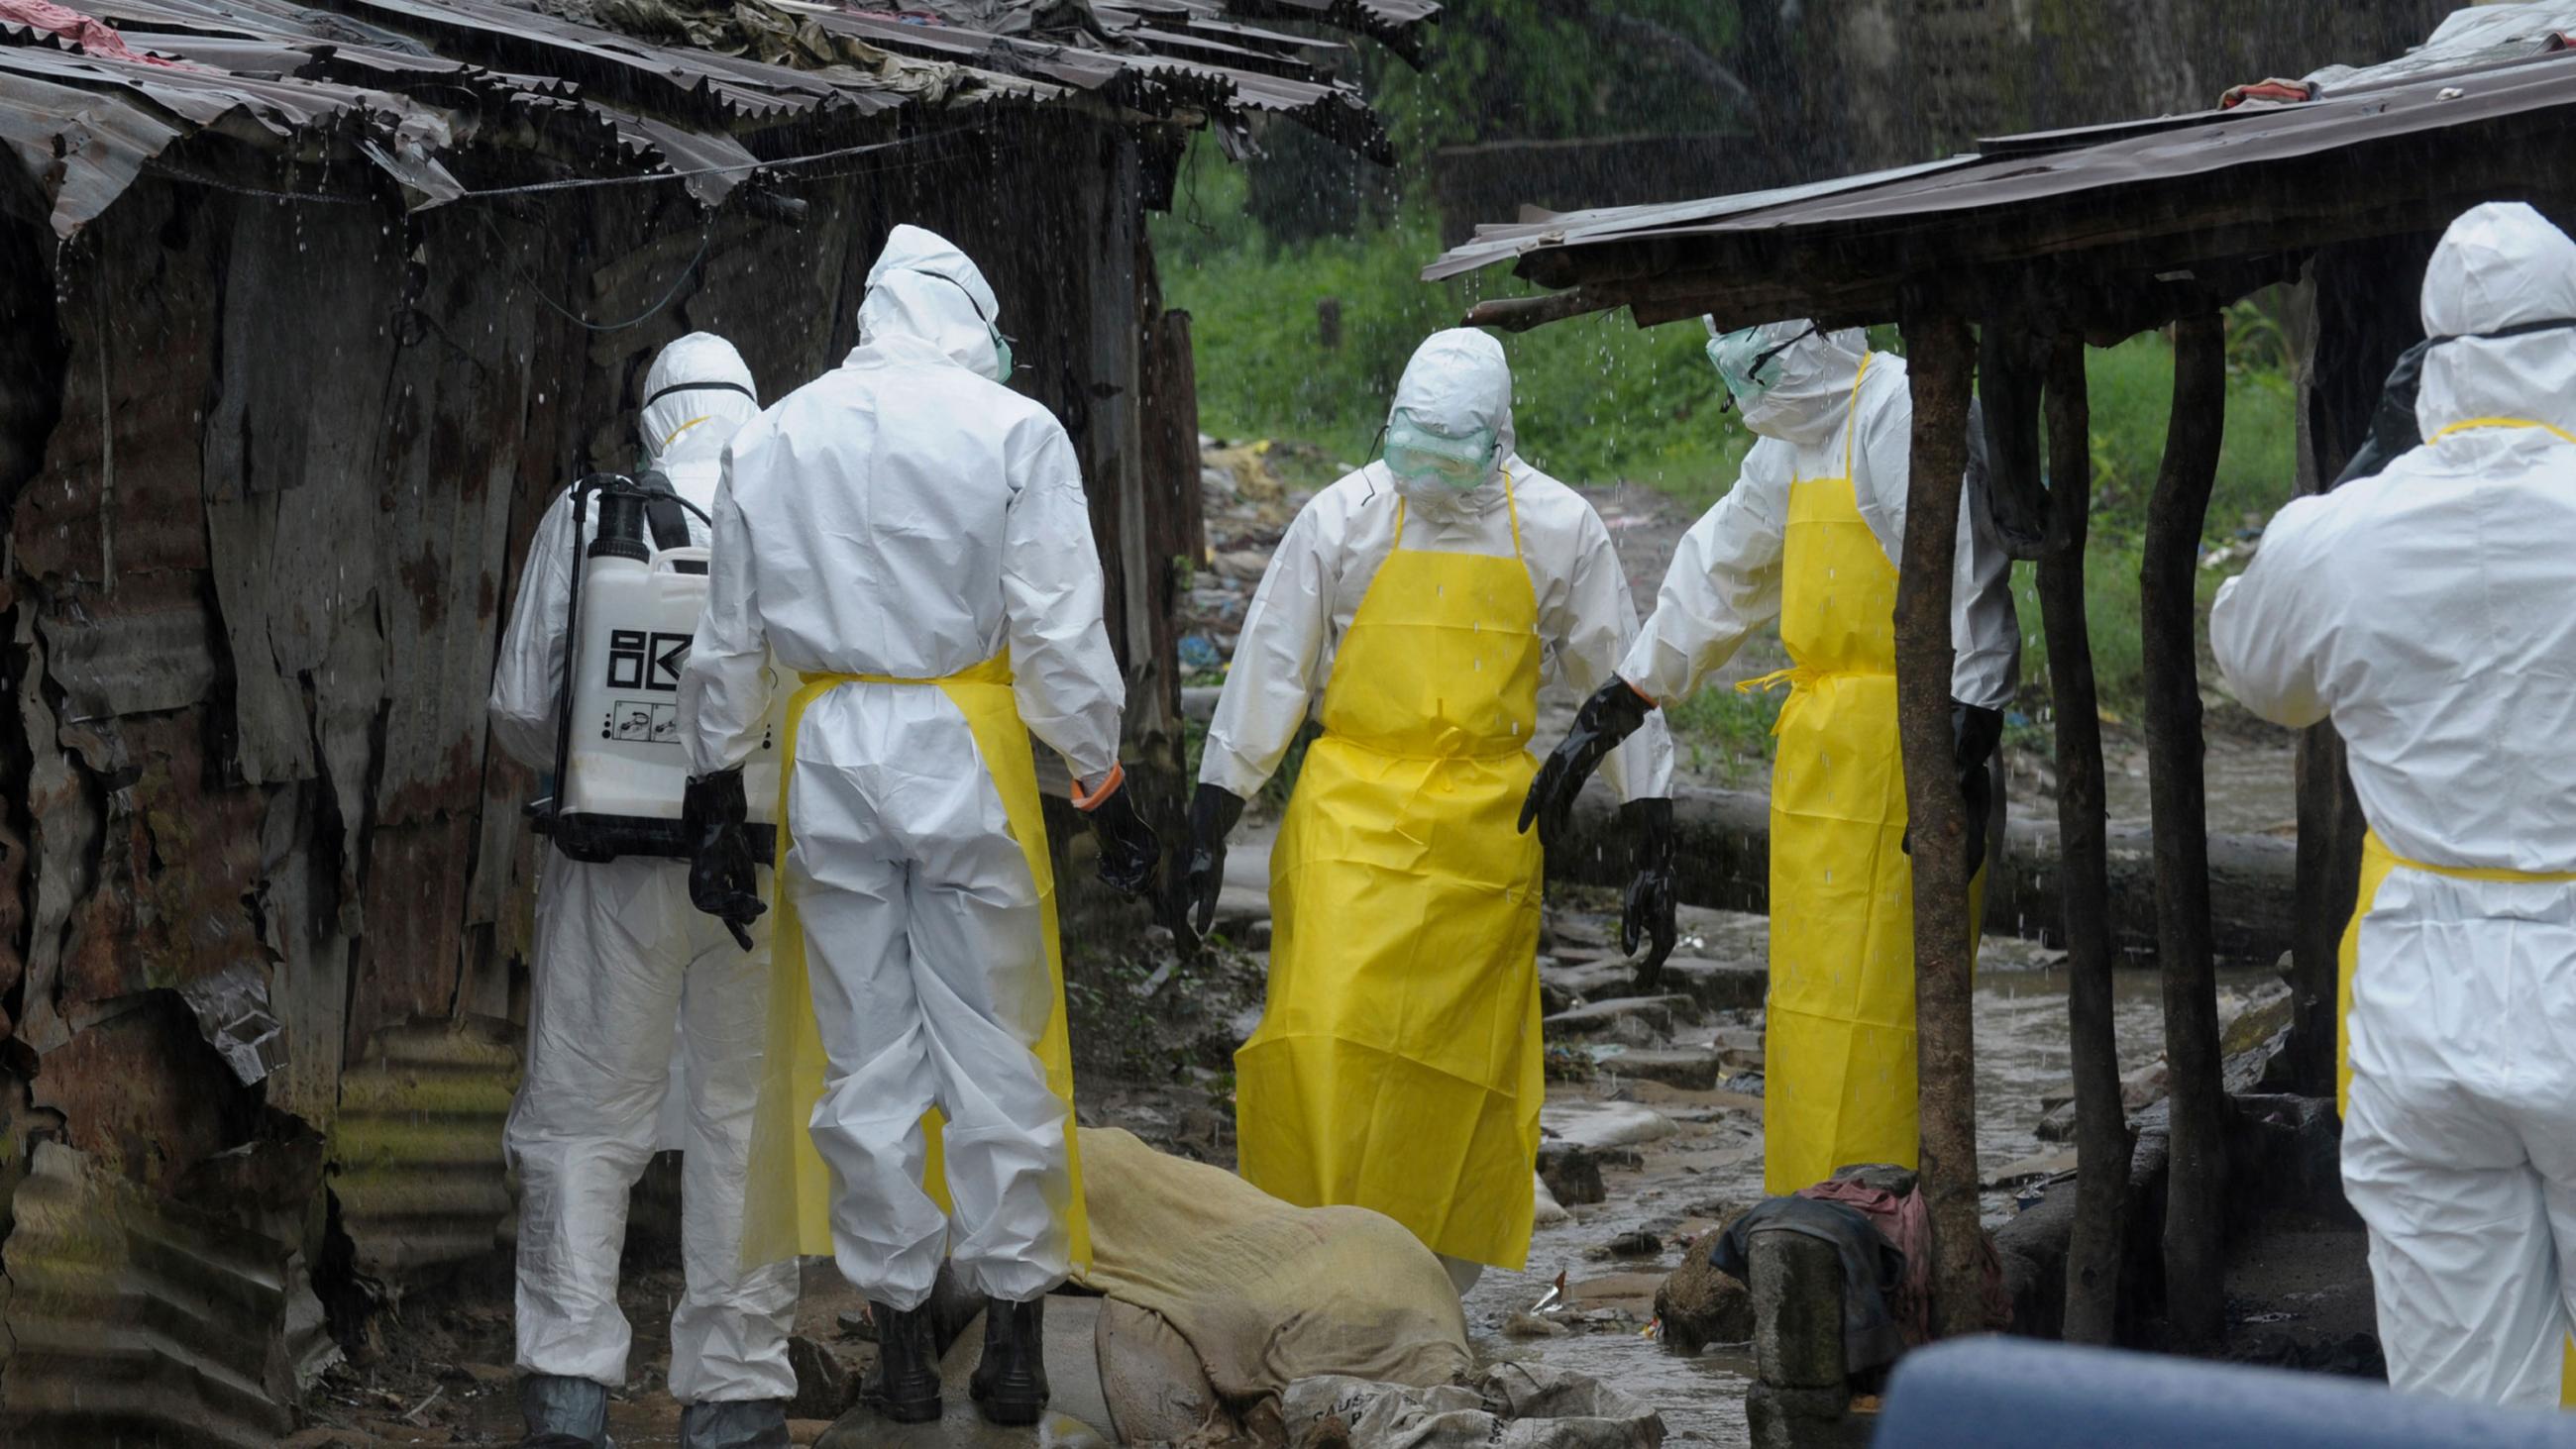 The photo shows half a dozen workers in full body protective suits standing in large mud puddles in the driving rain beside a body draped by a thin muslin cloth in between some ramshackle shacks. Some are pointing, and they appear to be discussing how to pick up the deceased victim. 